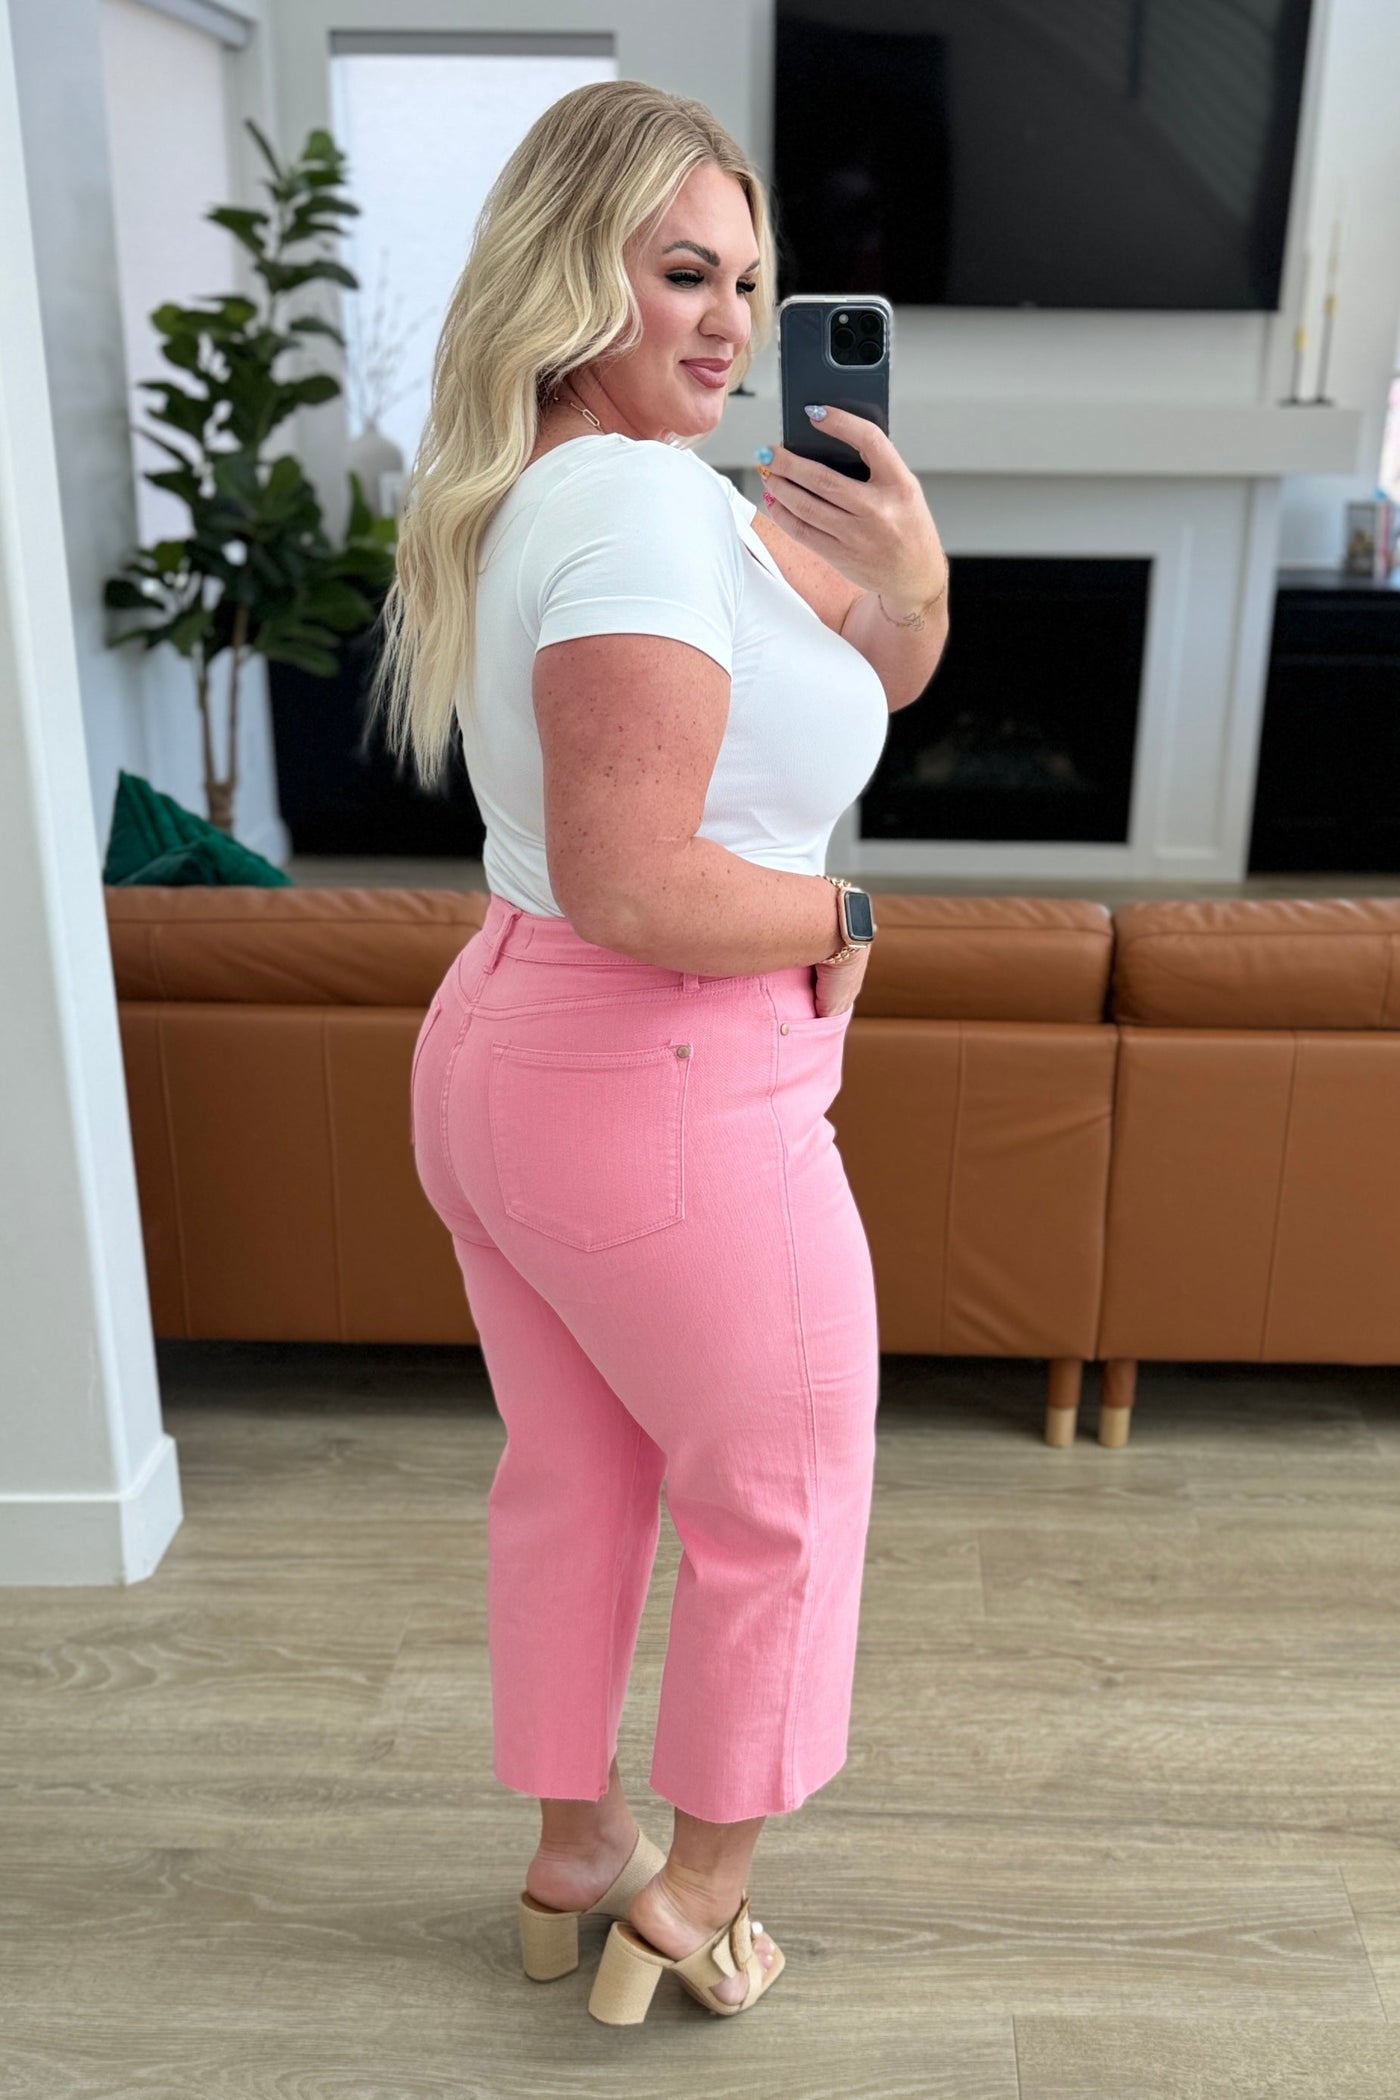 Slip into style and comfort with our Lisa High Rise Control Top Crop Jeans from Judy Blue. Featuring tummy control technology and 4-way stretch, these jeans provide a flattering fit